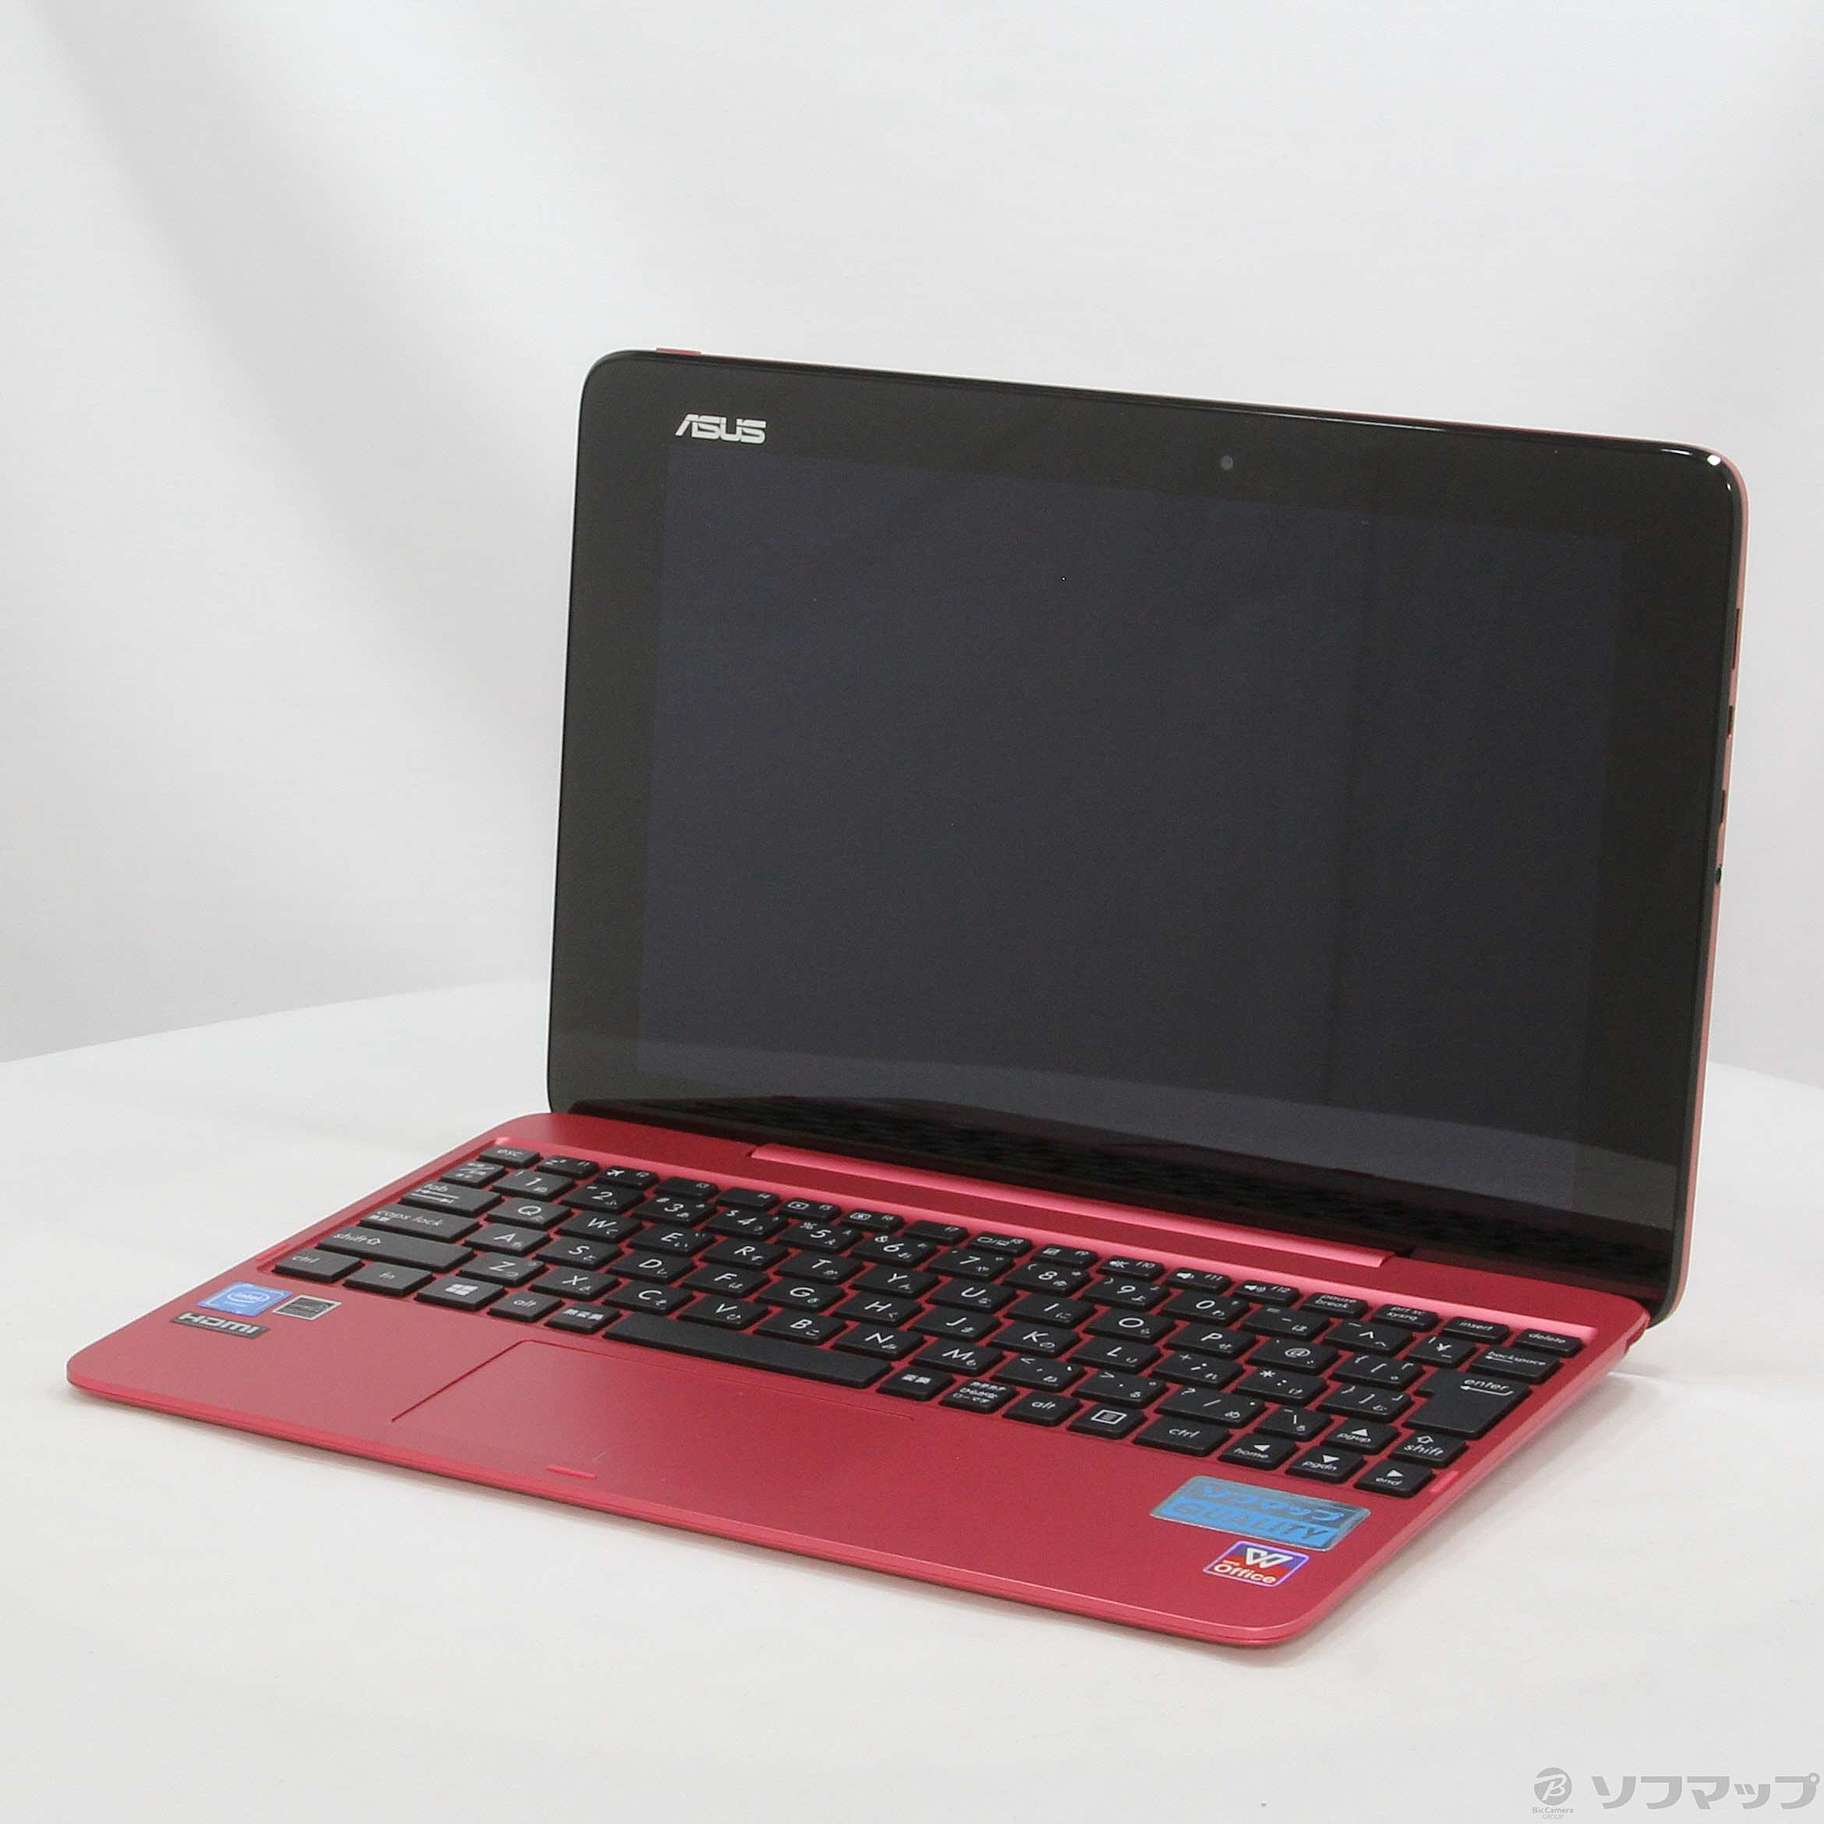 ASUS TransBook T100HA-ROUGE [ルージュレッド]